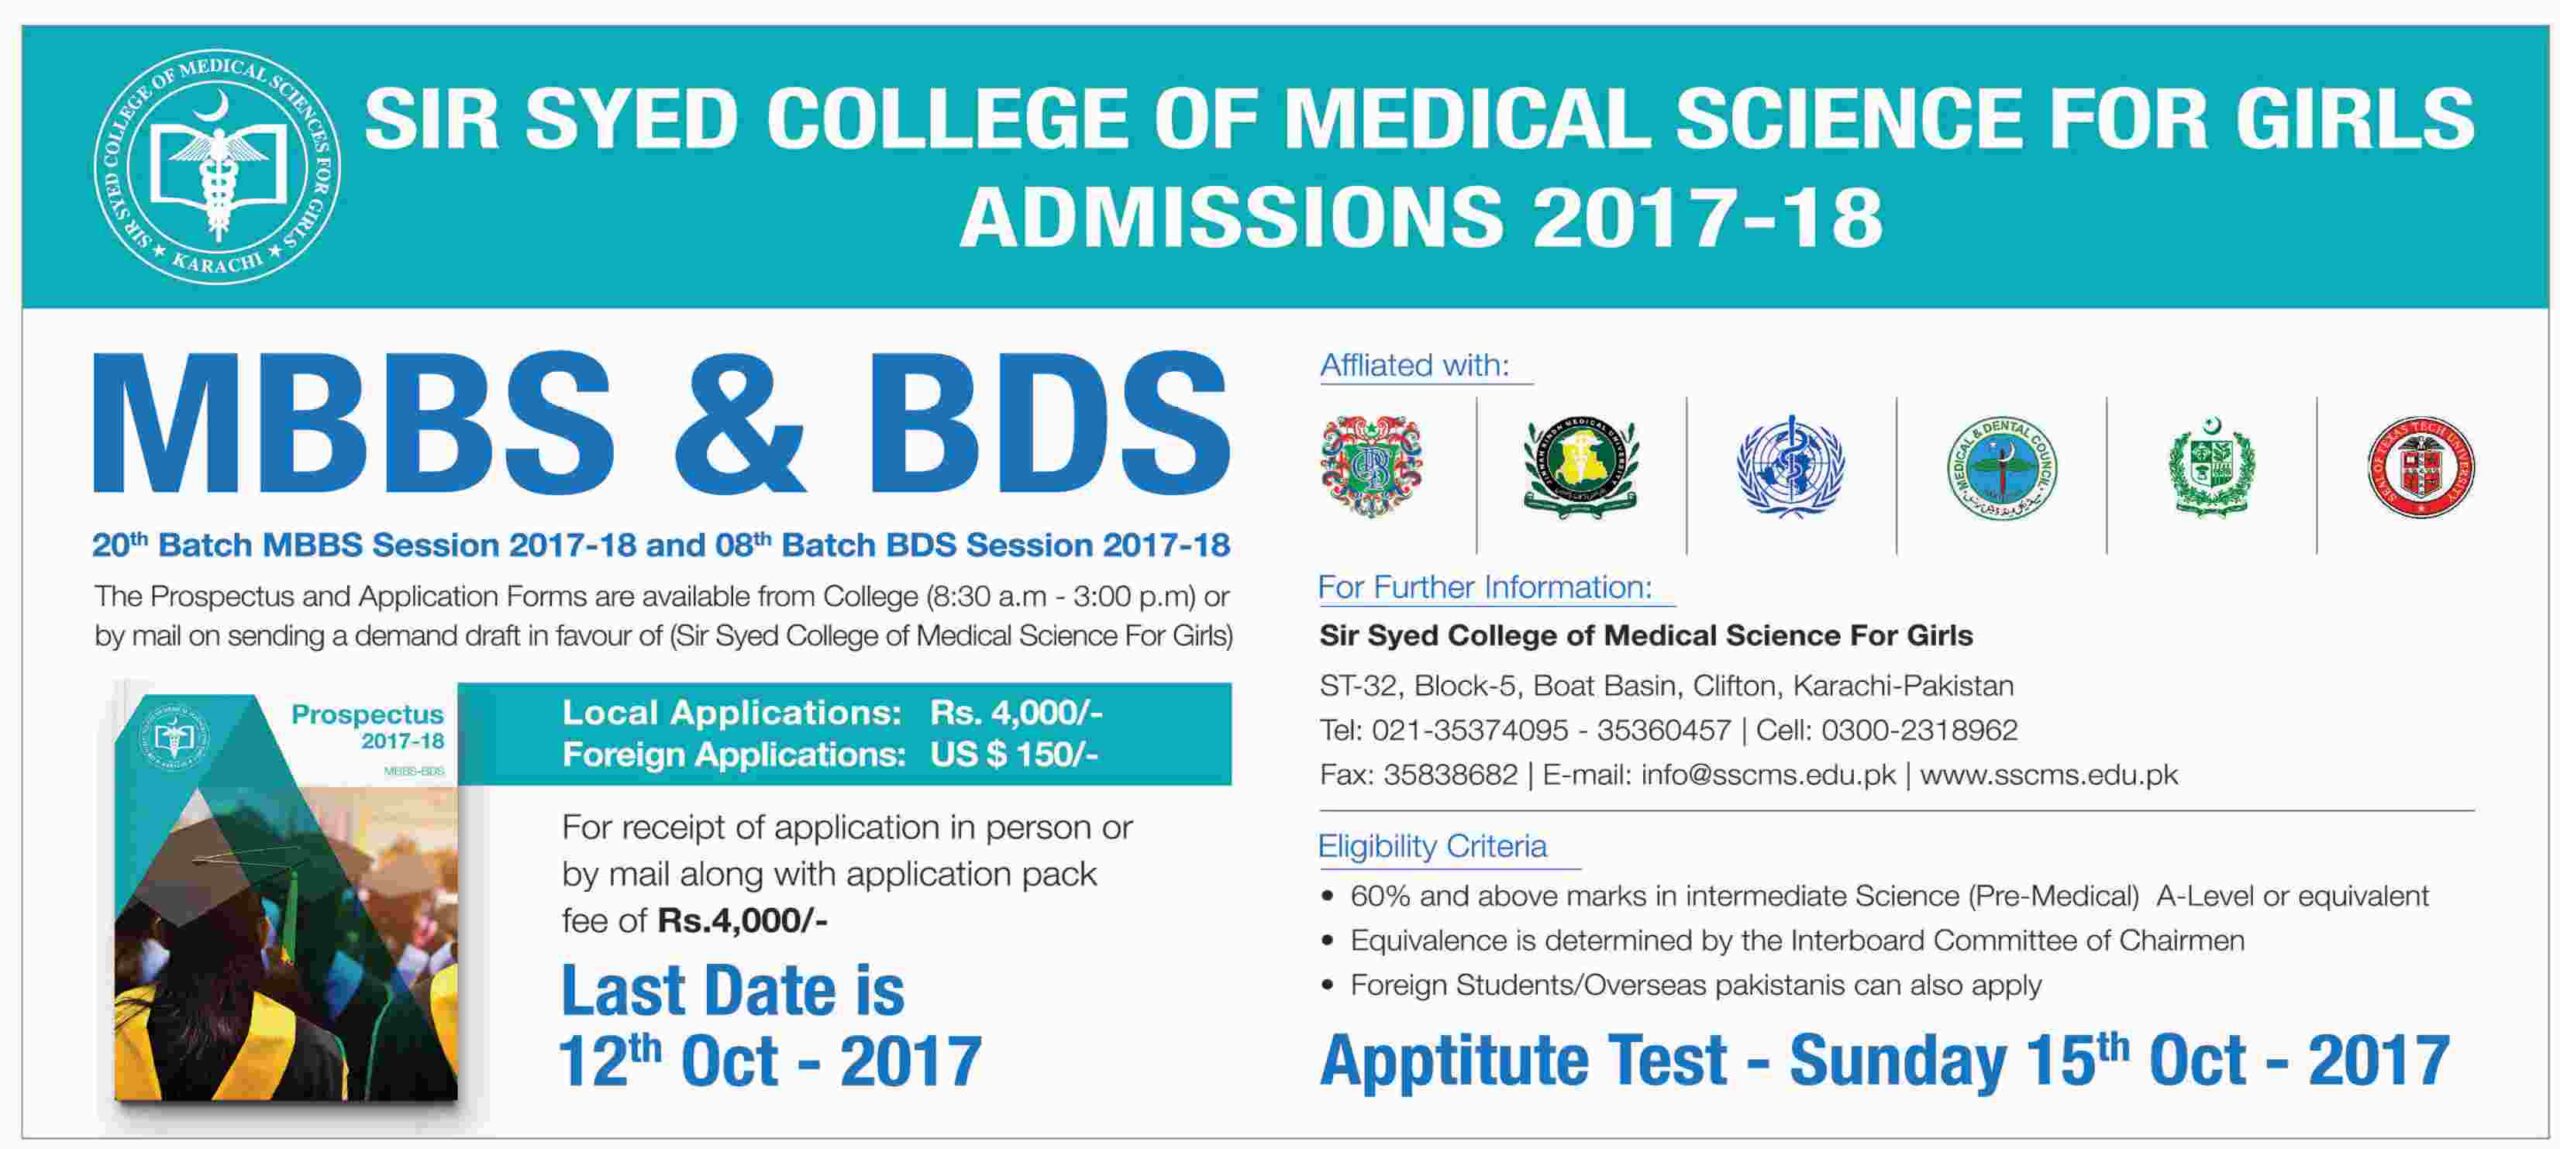 Sir Syed College Of Medical Sciences For Girls Admission 2017